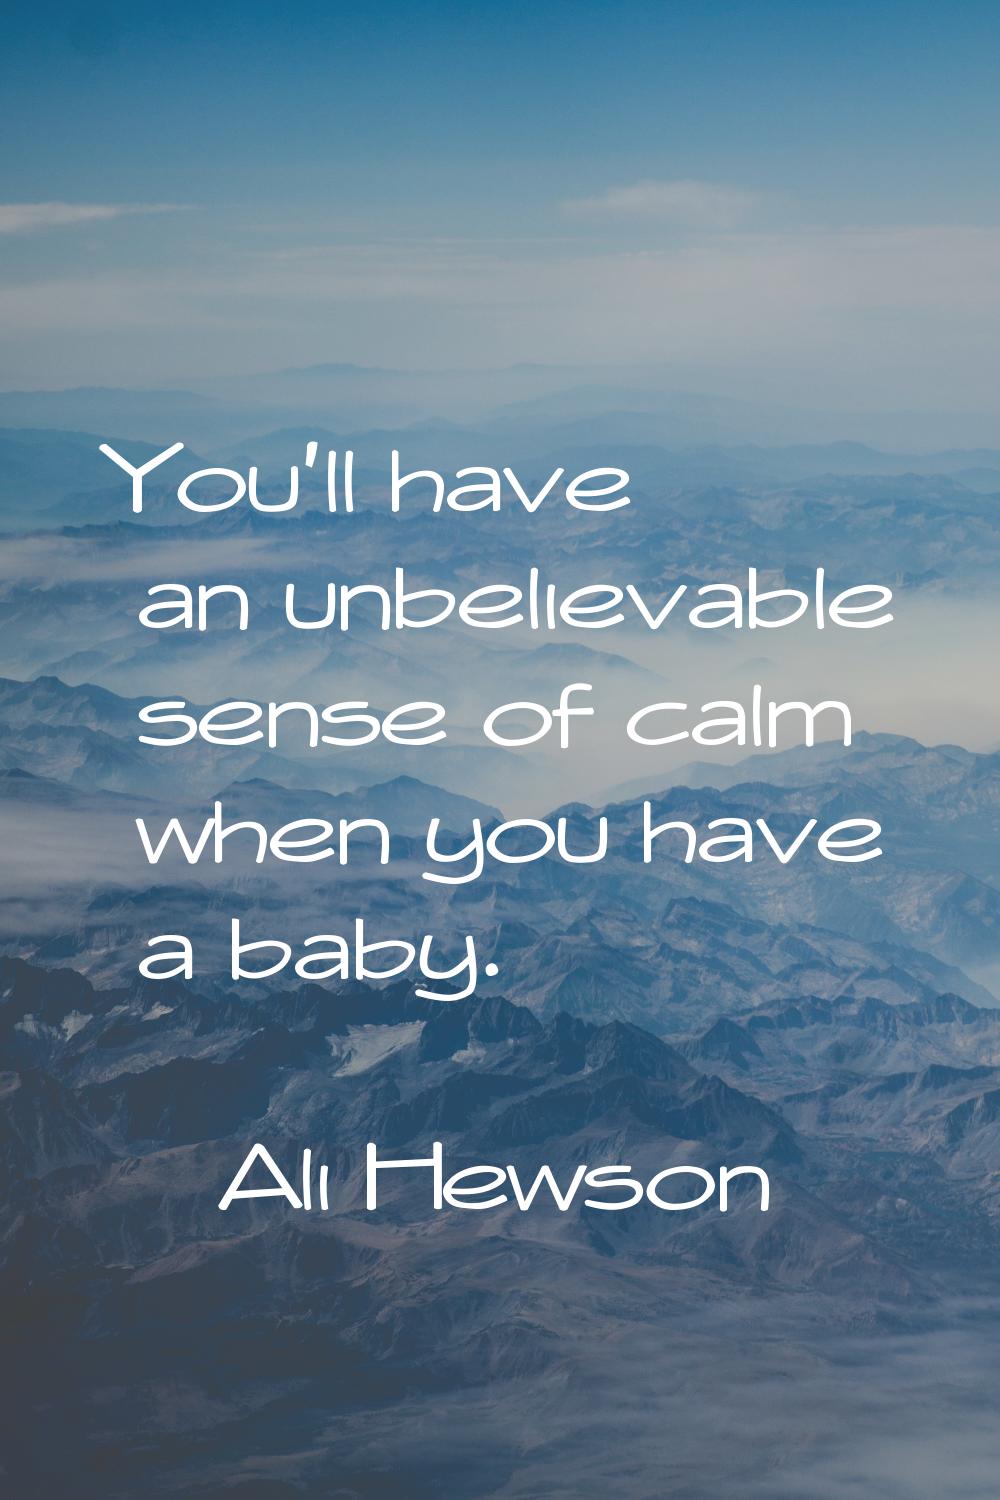 You'll have an unbelievable sense of calm when you have a baby.